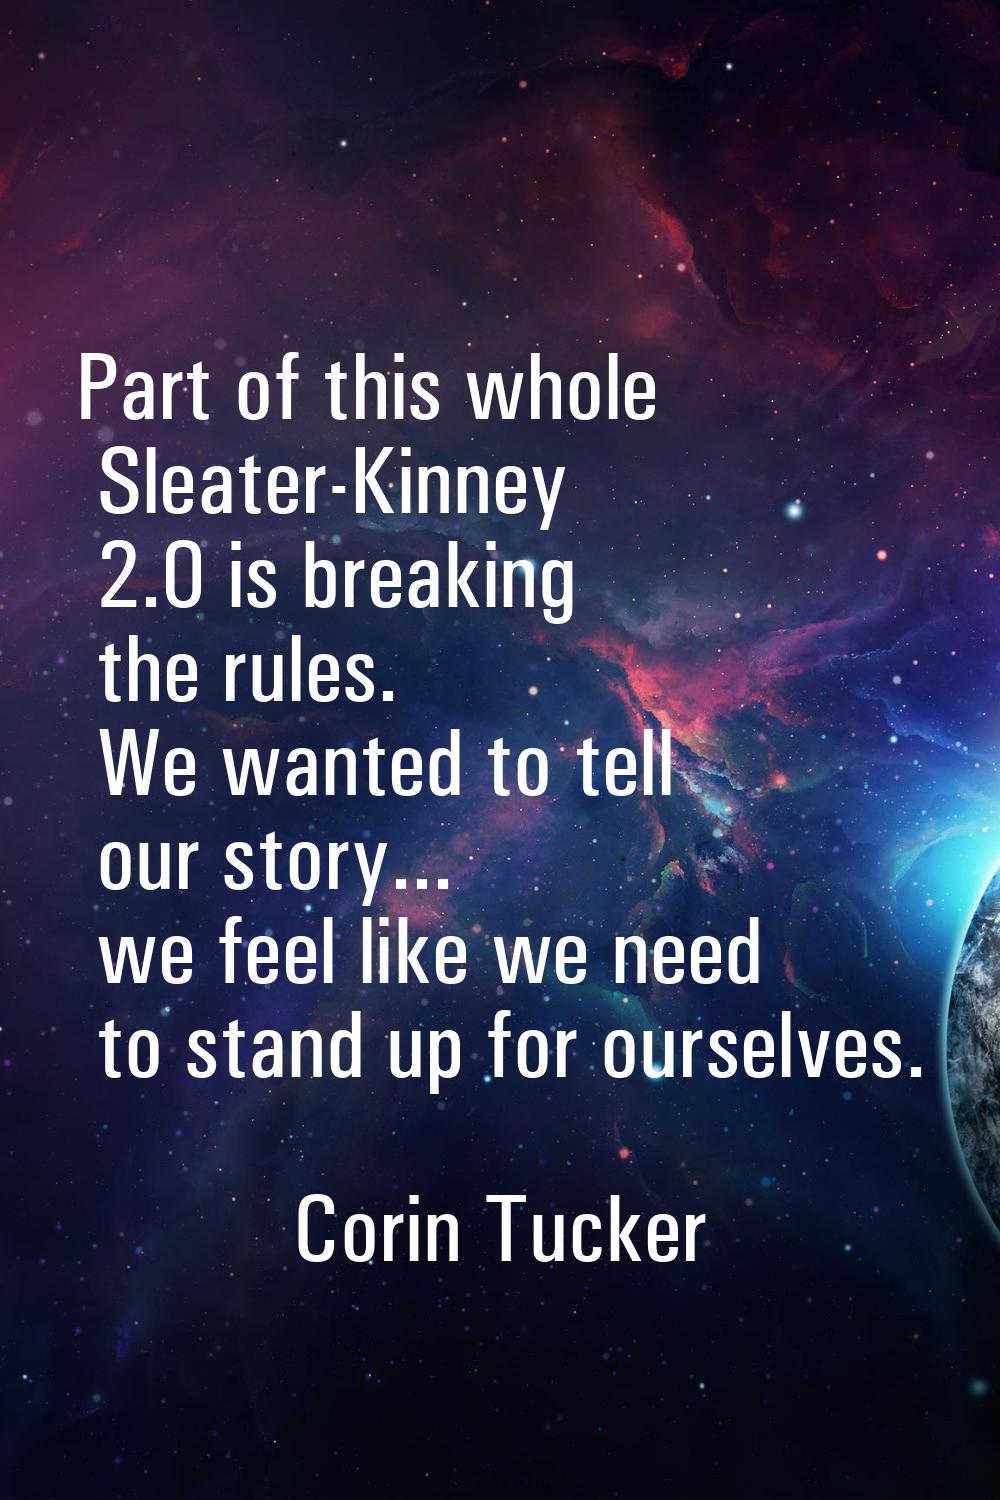 Part of this whole Sleater-Kinney 2.0 is breaking the rules. We wanted to tell our story... we feel